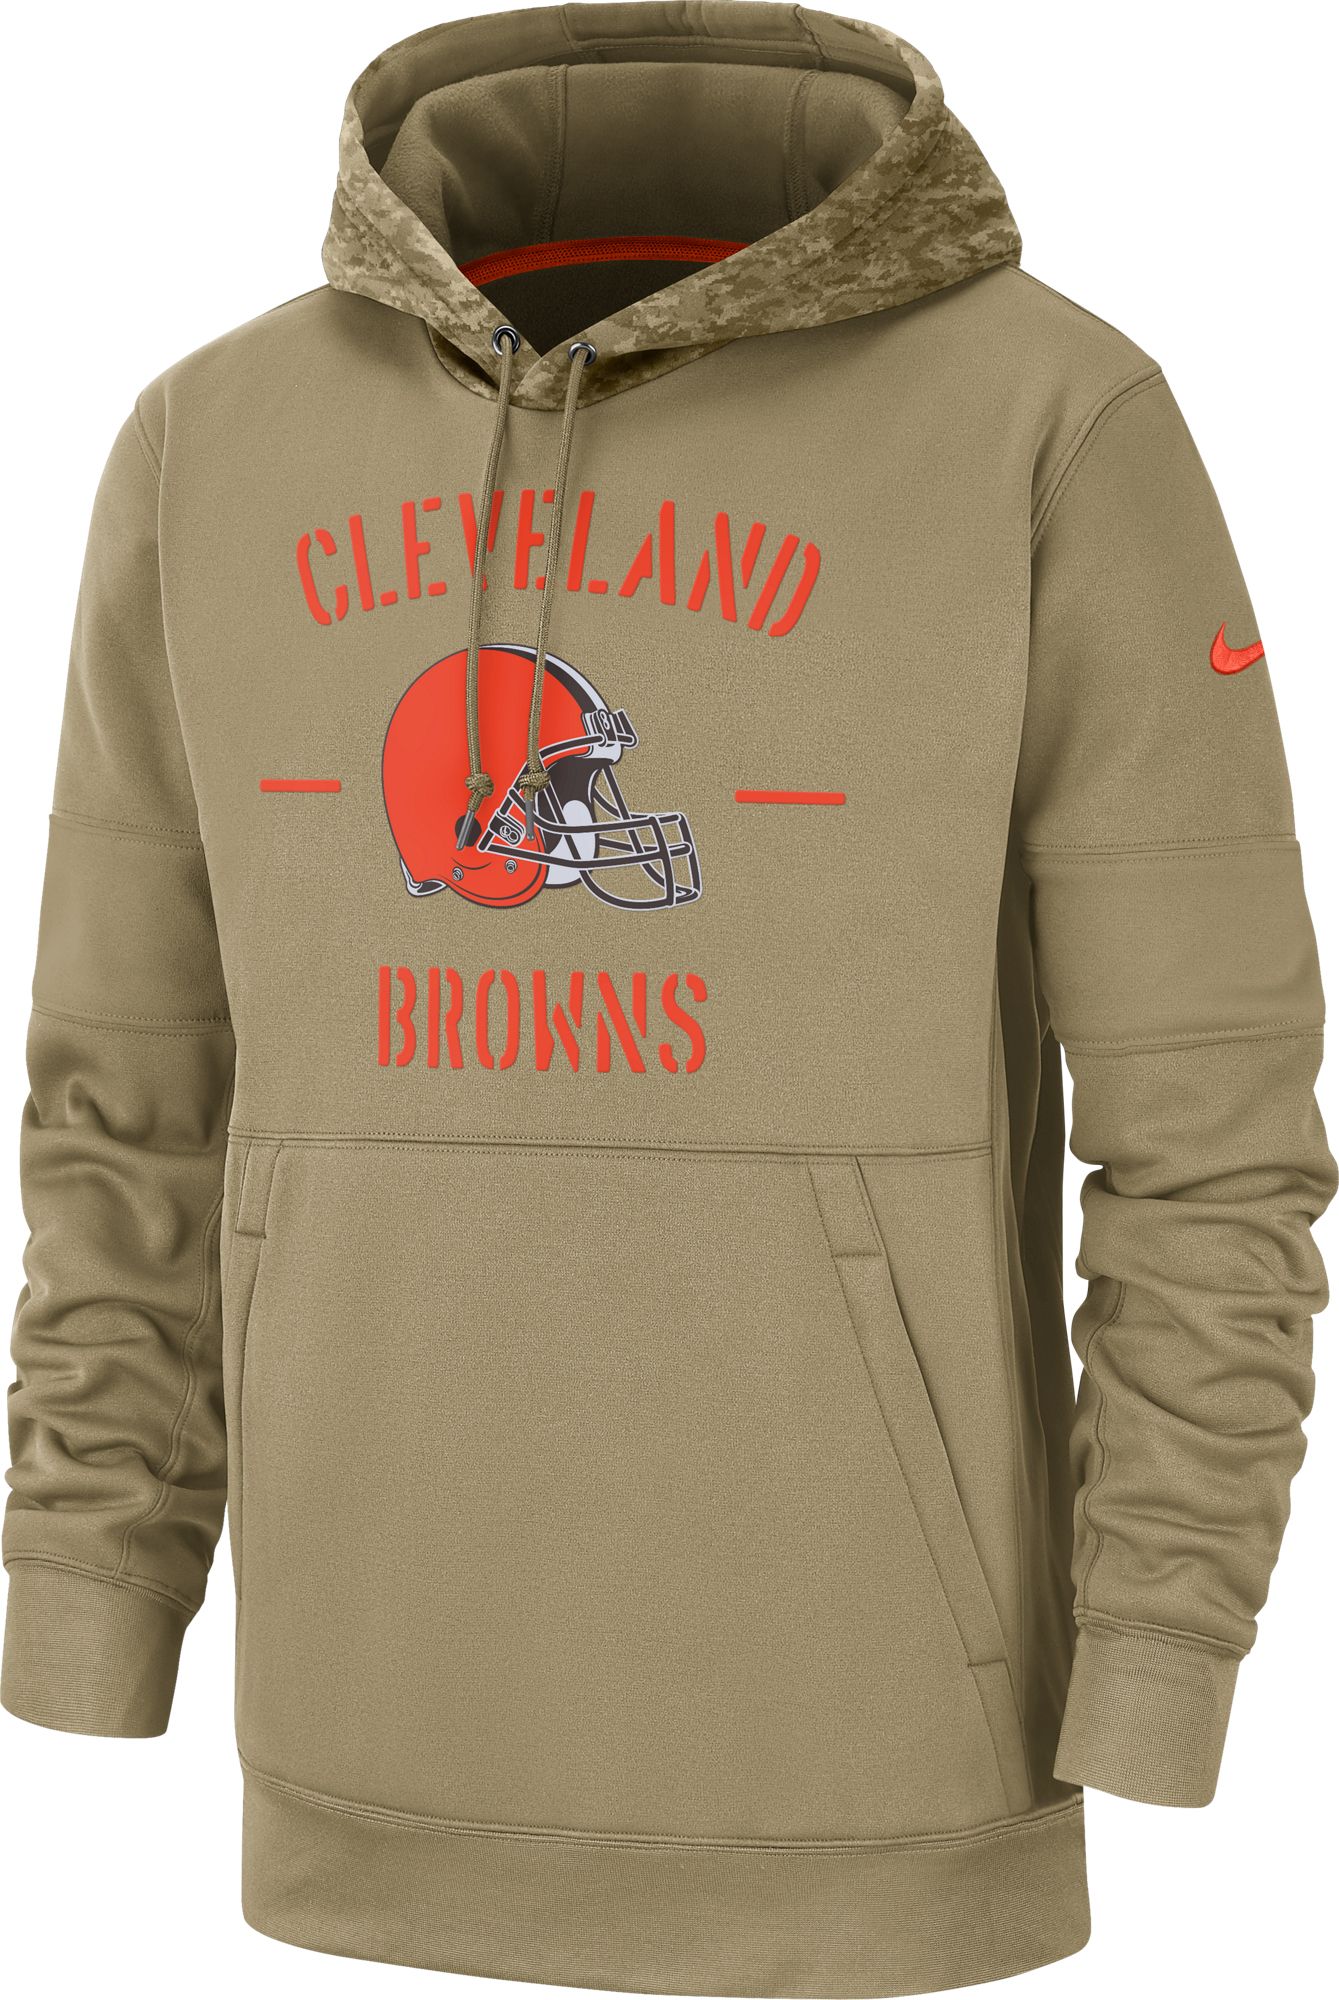 Cleveland Browns Therma-FIT Beige 